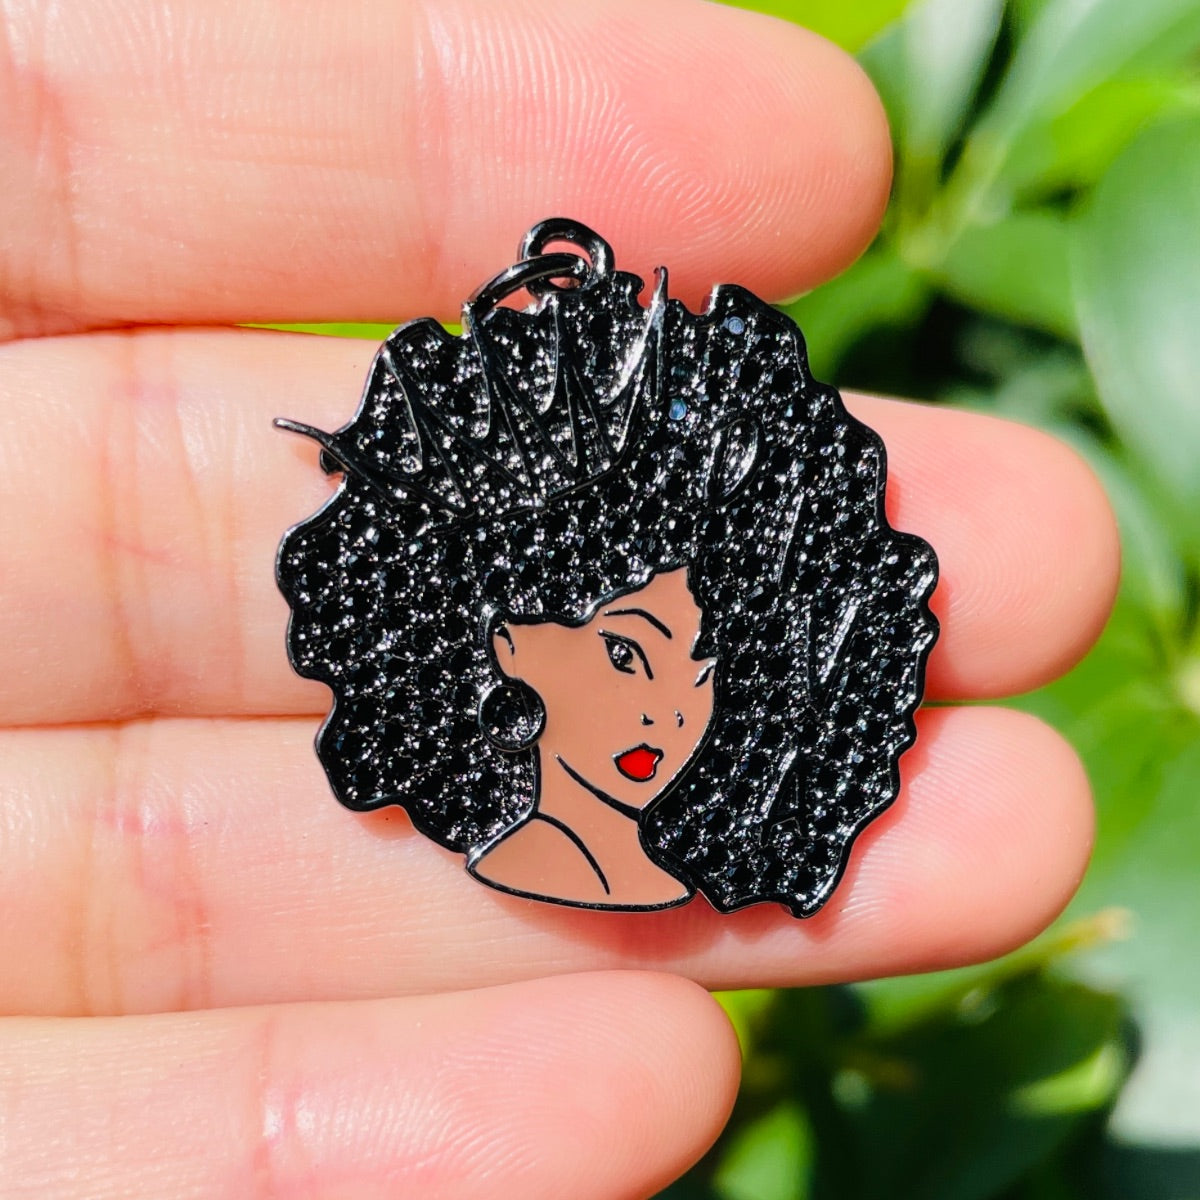 10pcs/lot 29*28mm CZ Paved Crown Diva Afro Girl Charms Black on Black CZ Paved Charms Afro Girl/Queen Charms Charms Beads Beyond